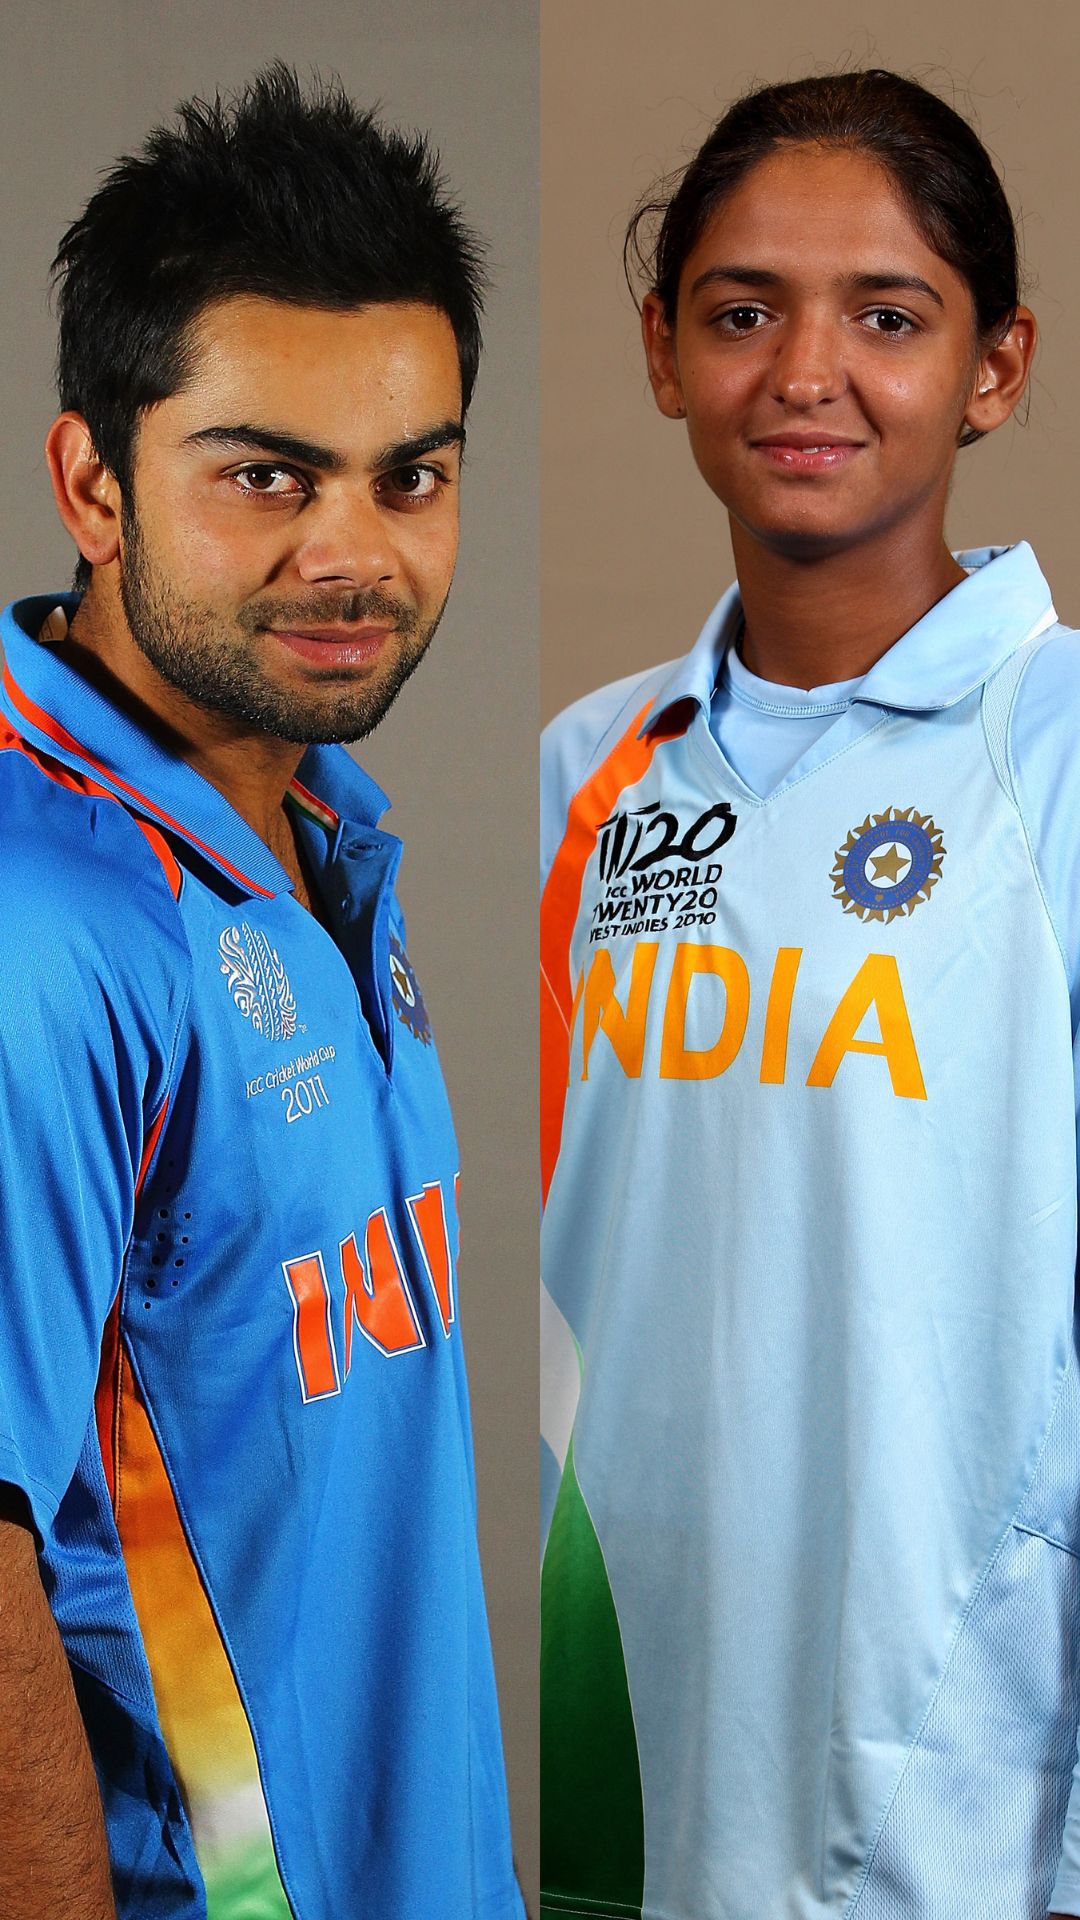 Fastest centuries for India in ODI cricket among active players, feat Kohli and Harmanpreet Kaur